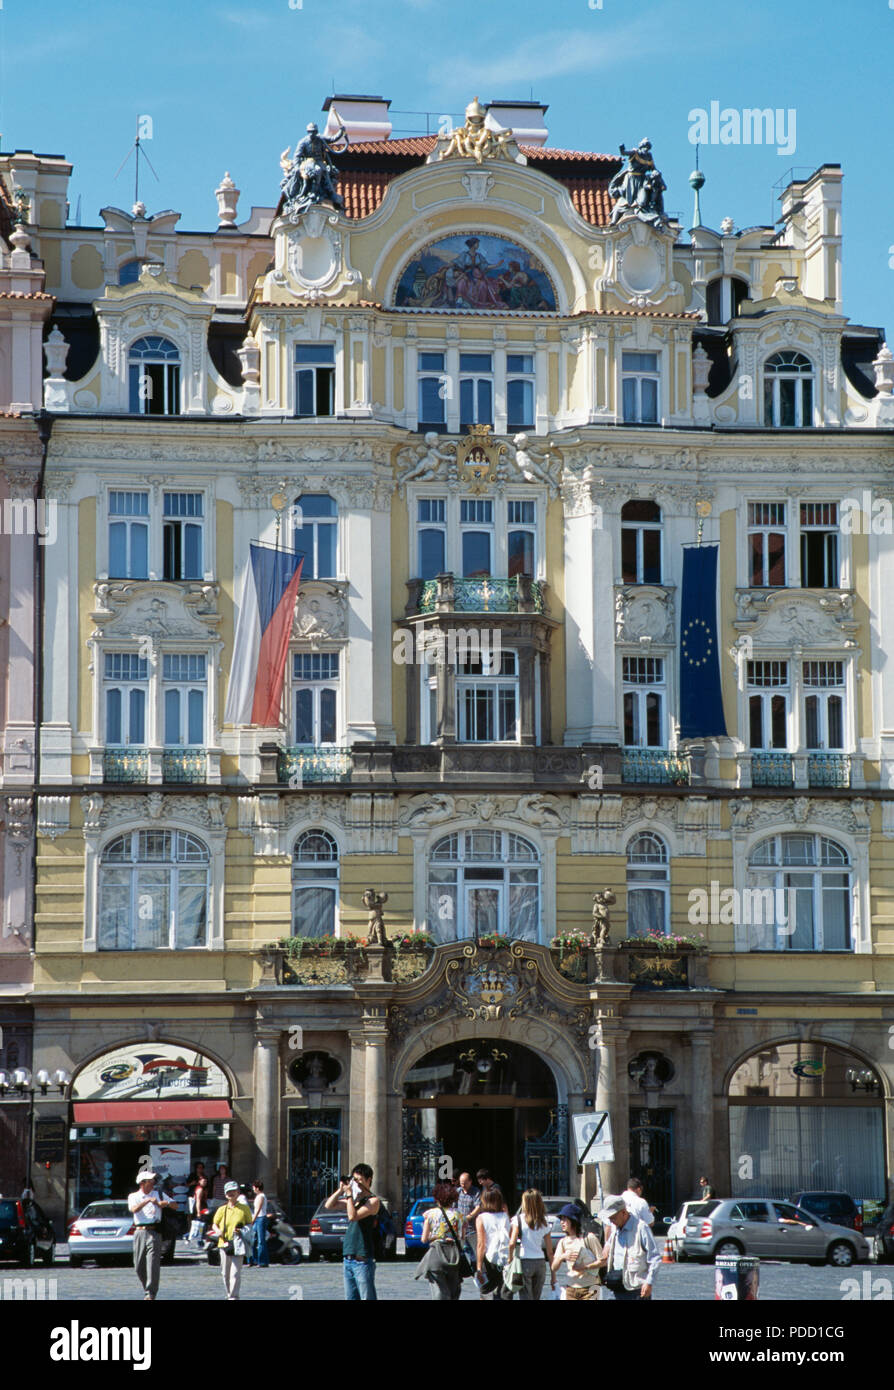 Art Nouveau building in Old Town Square in the city of Prague         FOR EDITORIAL USE ONLY Stock Photo